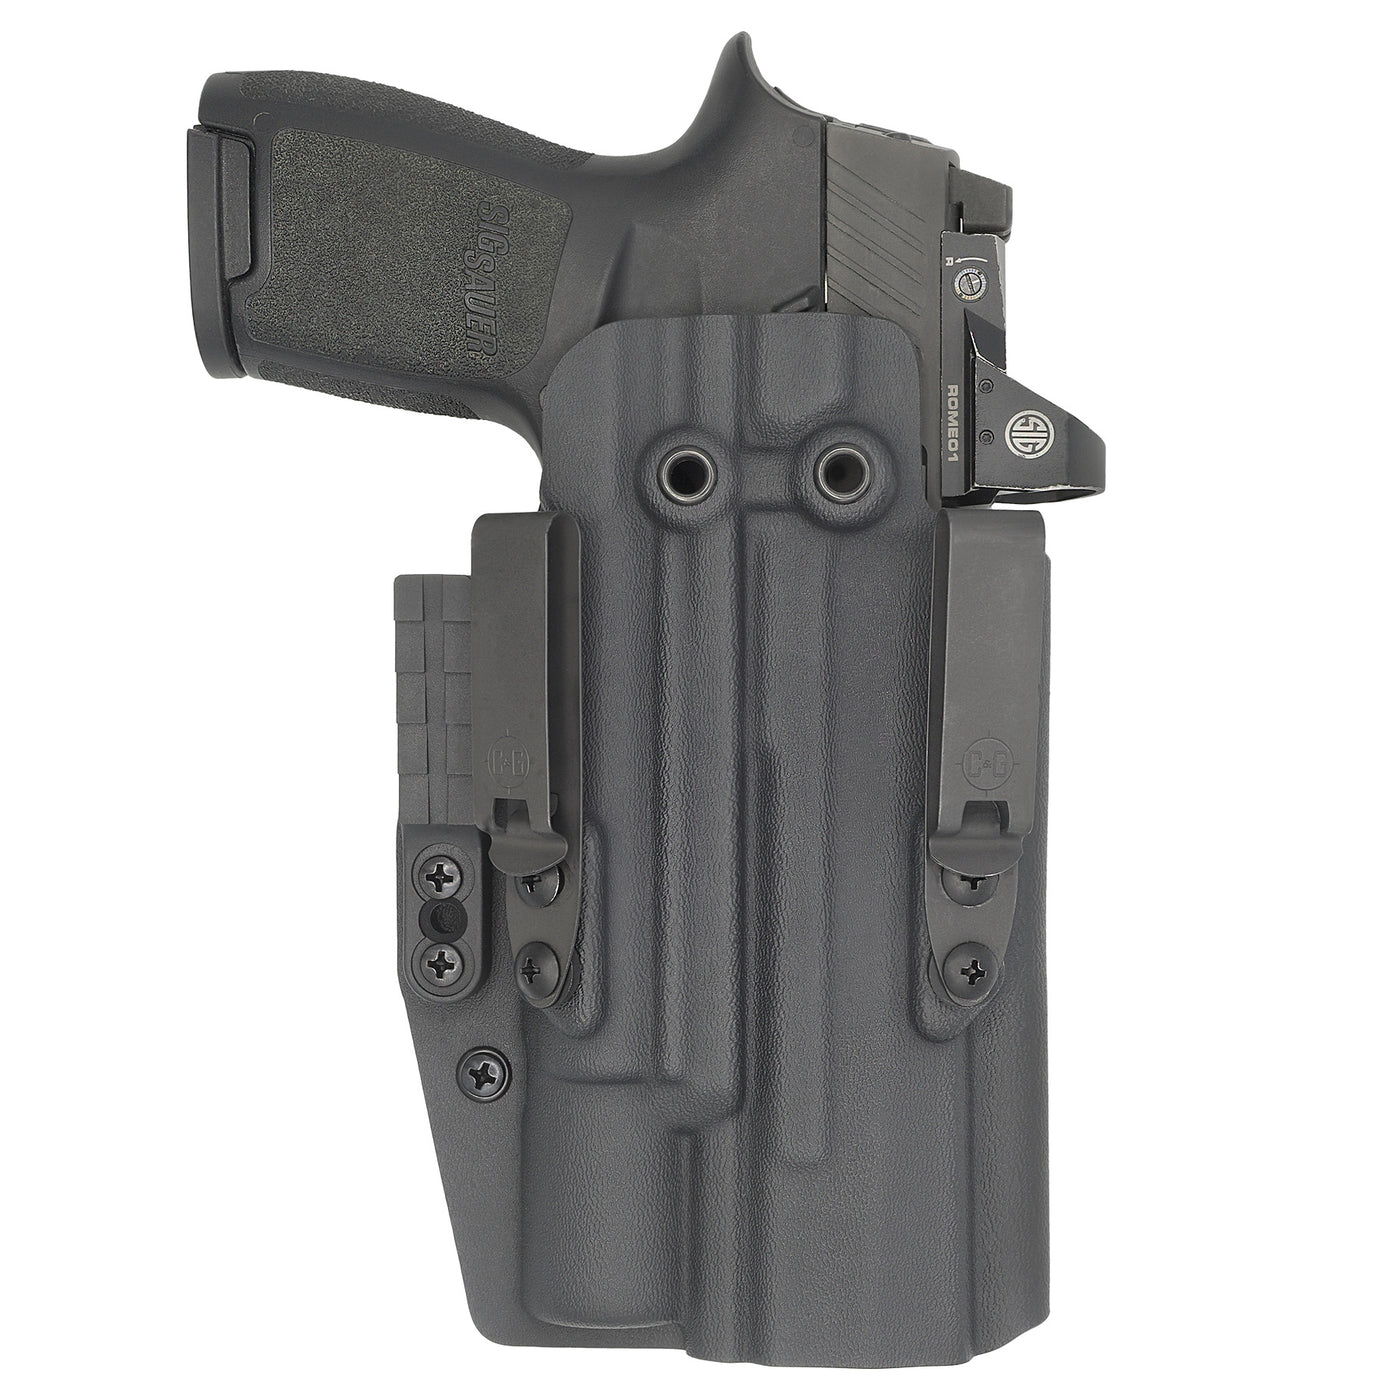 C&G Holsters quickship IWB ALPHA UPGRADE Tactical XDM Elite Surefire X300 in holstered position